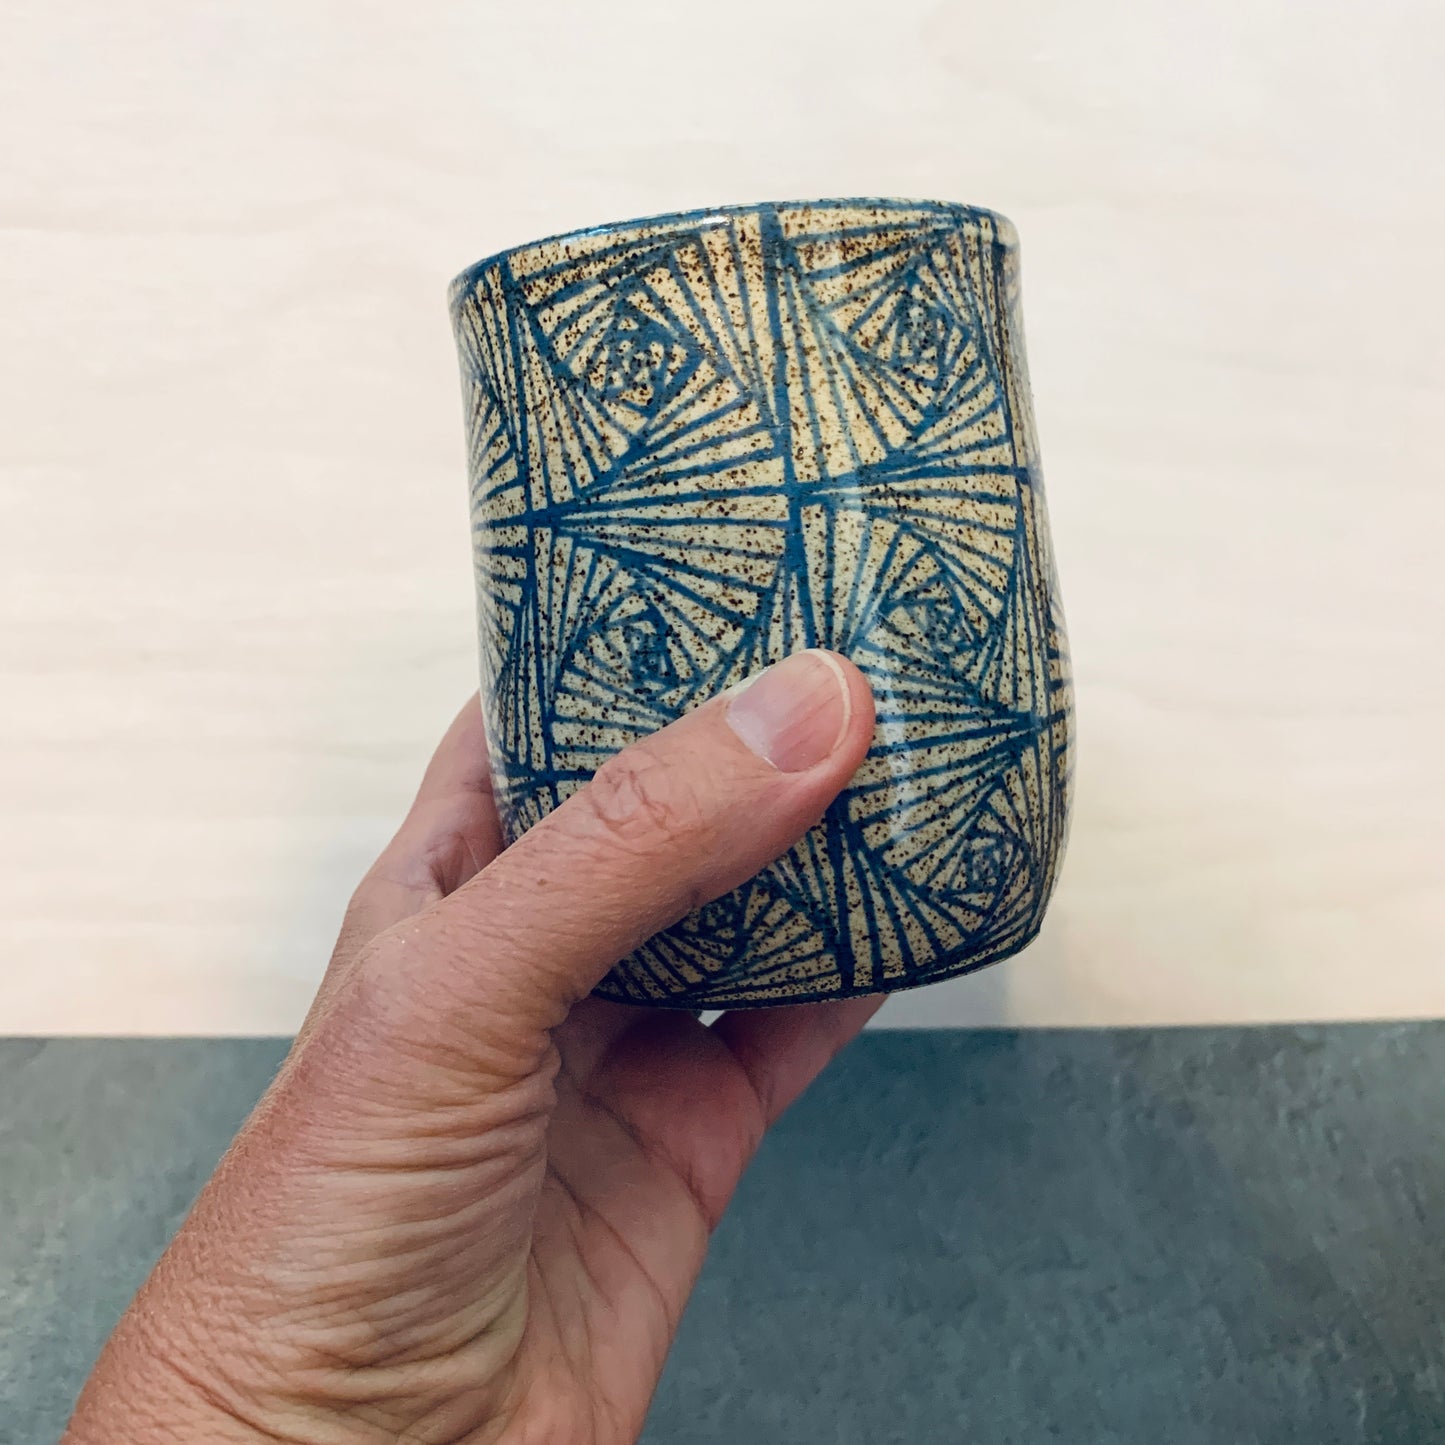 Tangled Squares Cup